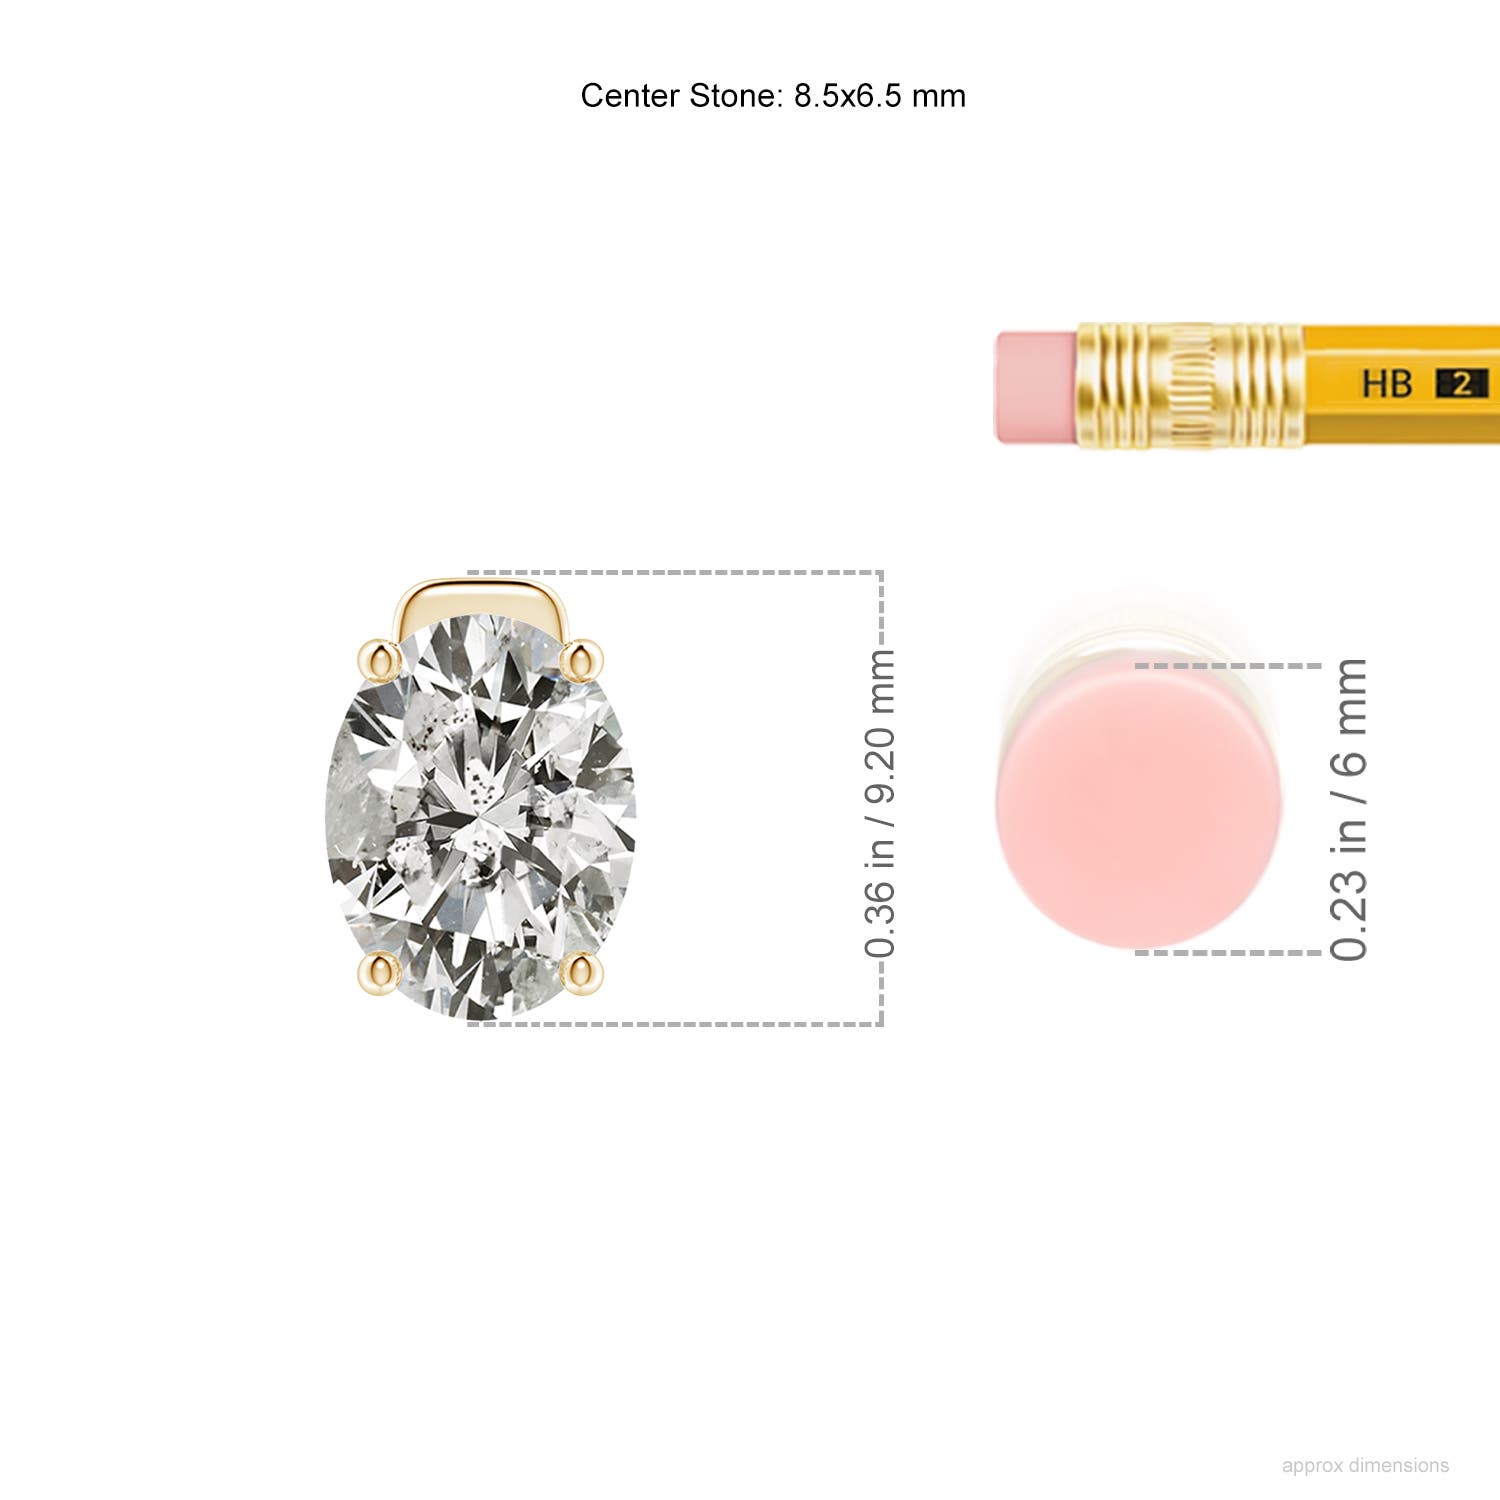 K, I3 / 1.5 CT / 14 KT Yellow Gold